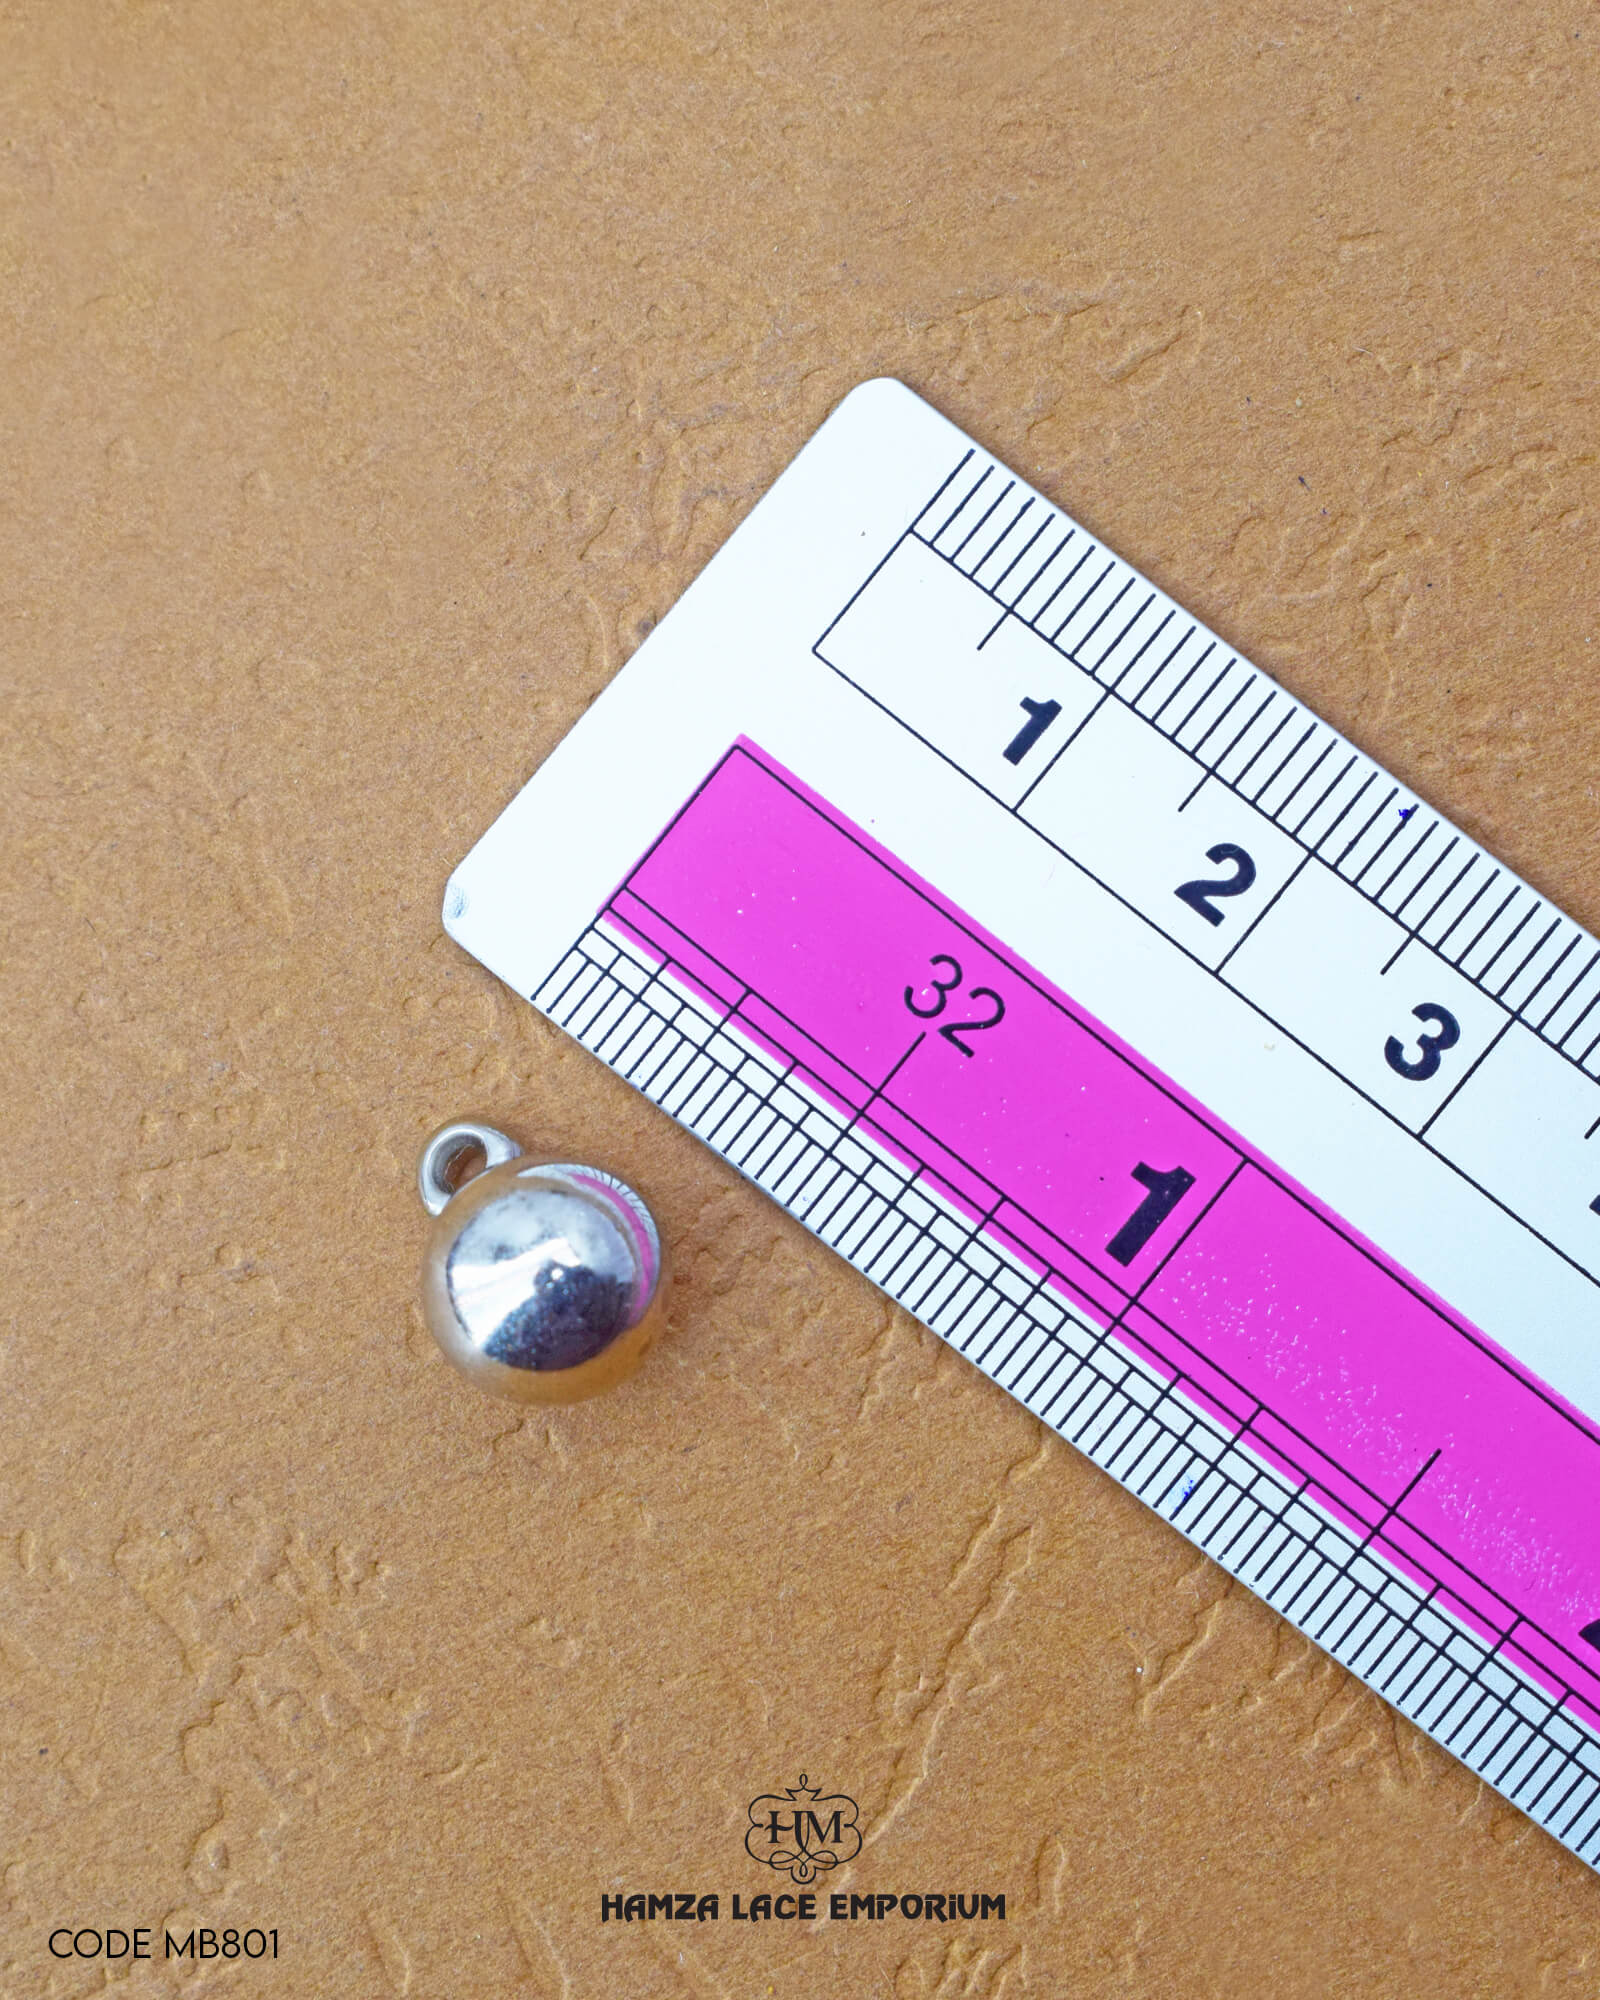 The size of the 'Plane Plastic Button MB801' is measured using a ruler.